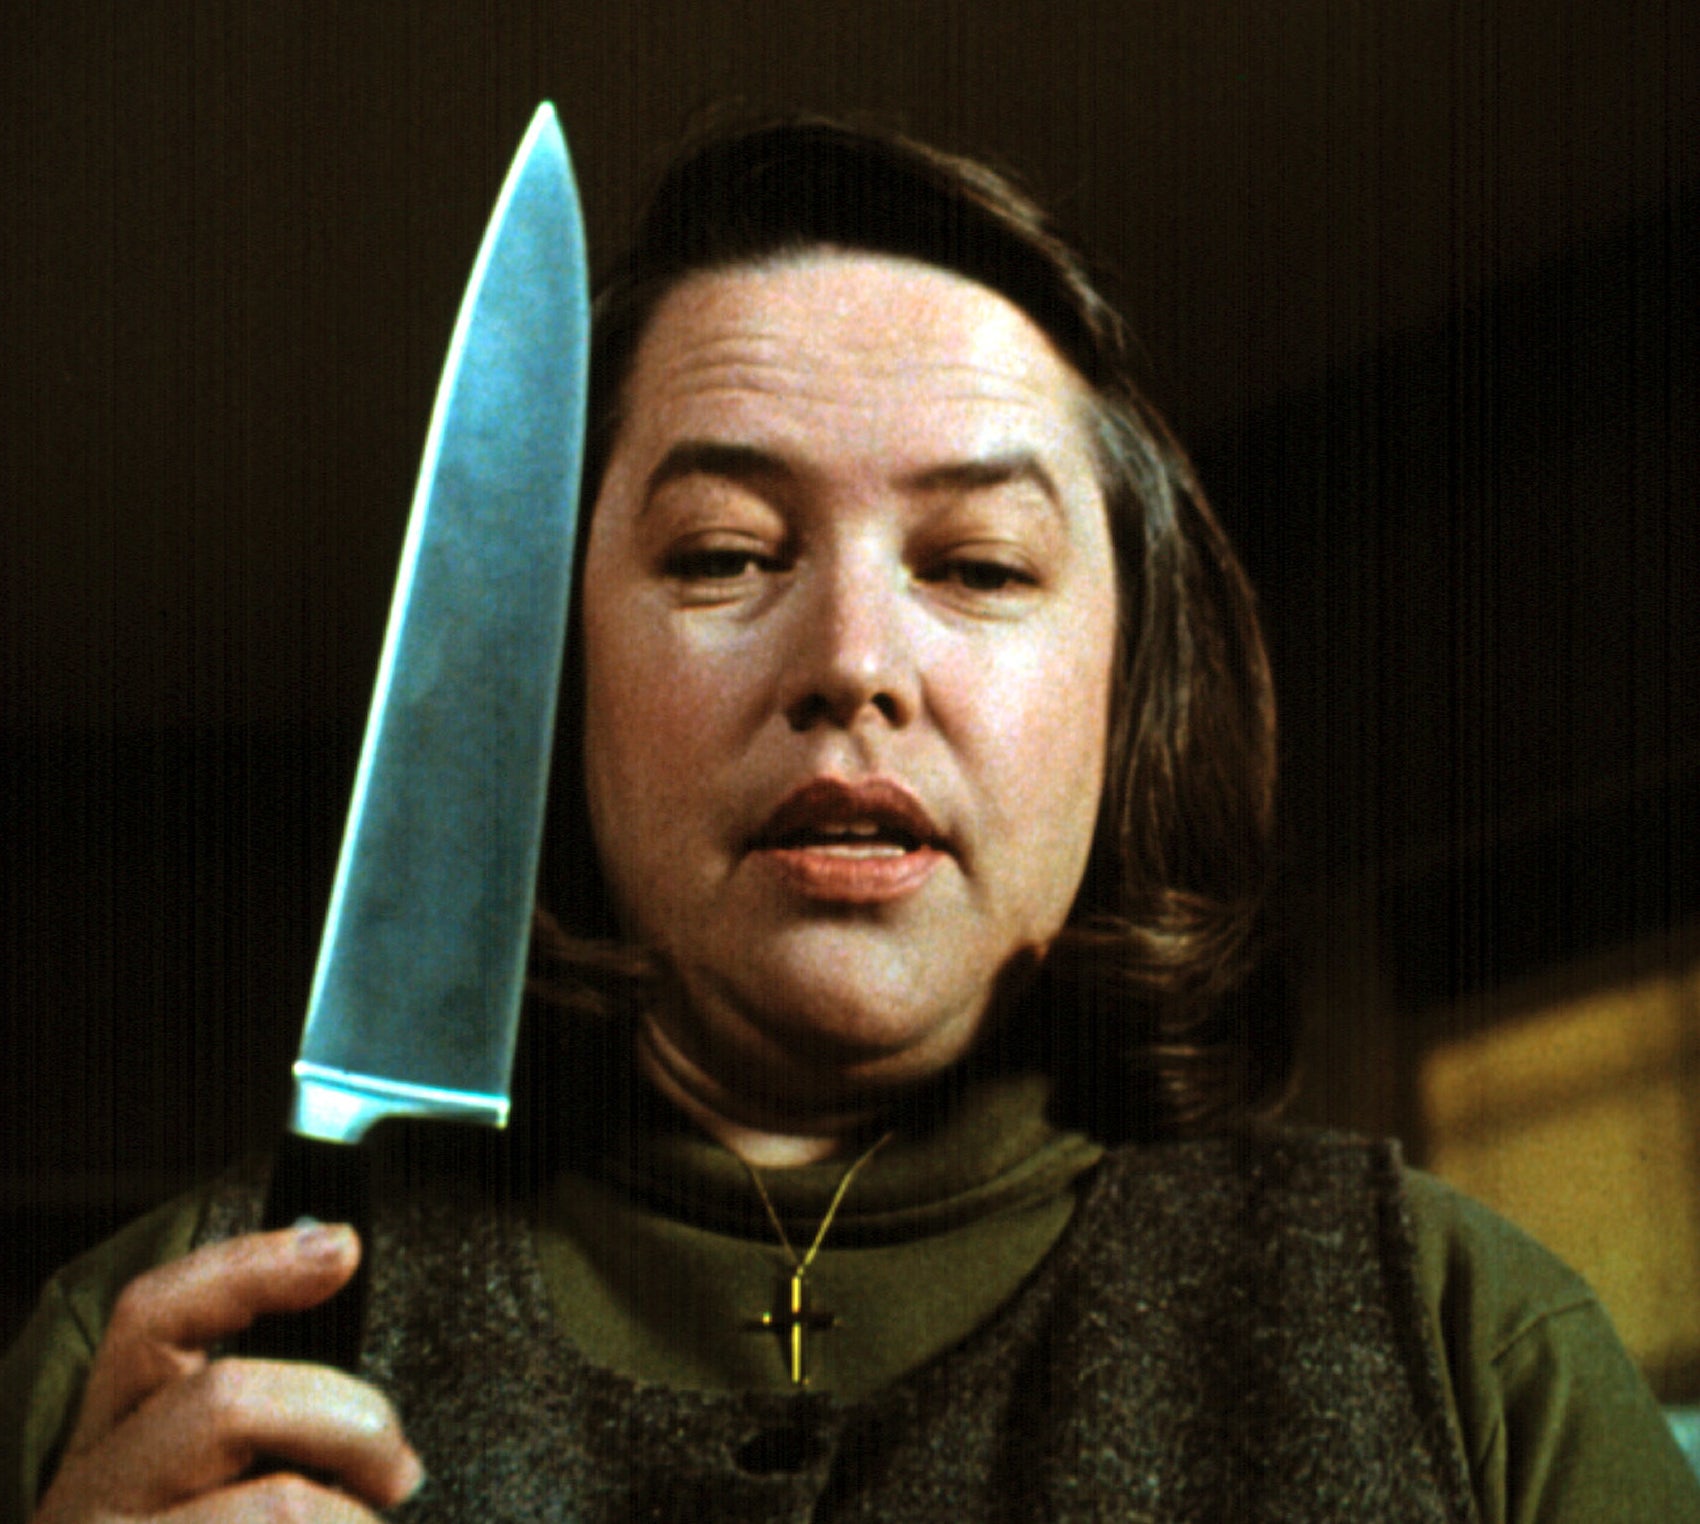 Kathy Bates as Annie, holding a giant butcher knife